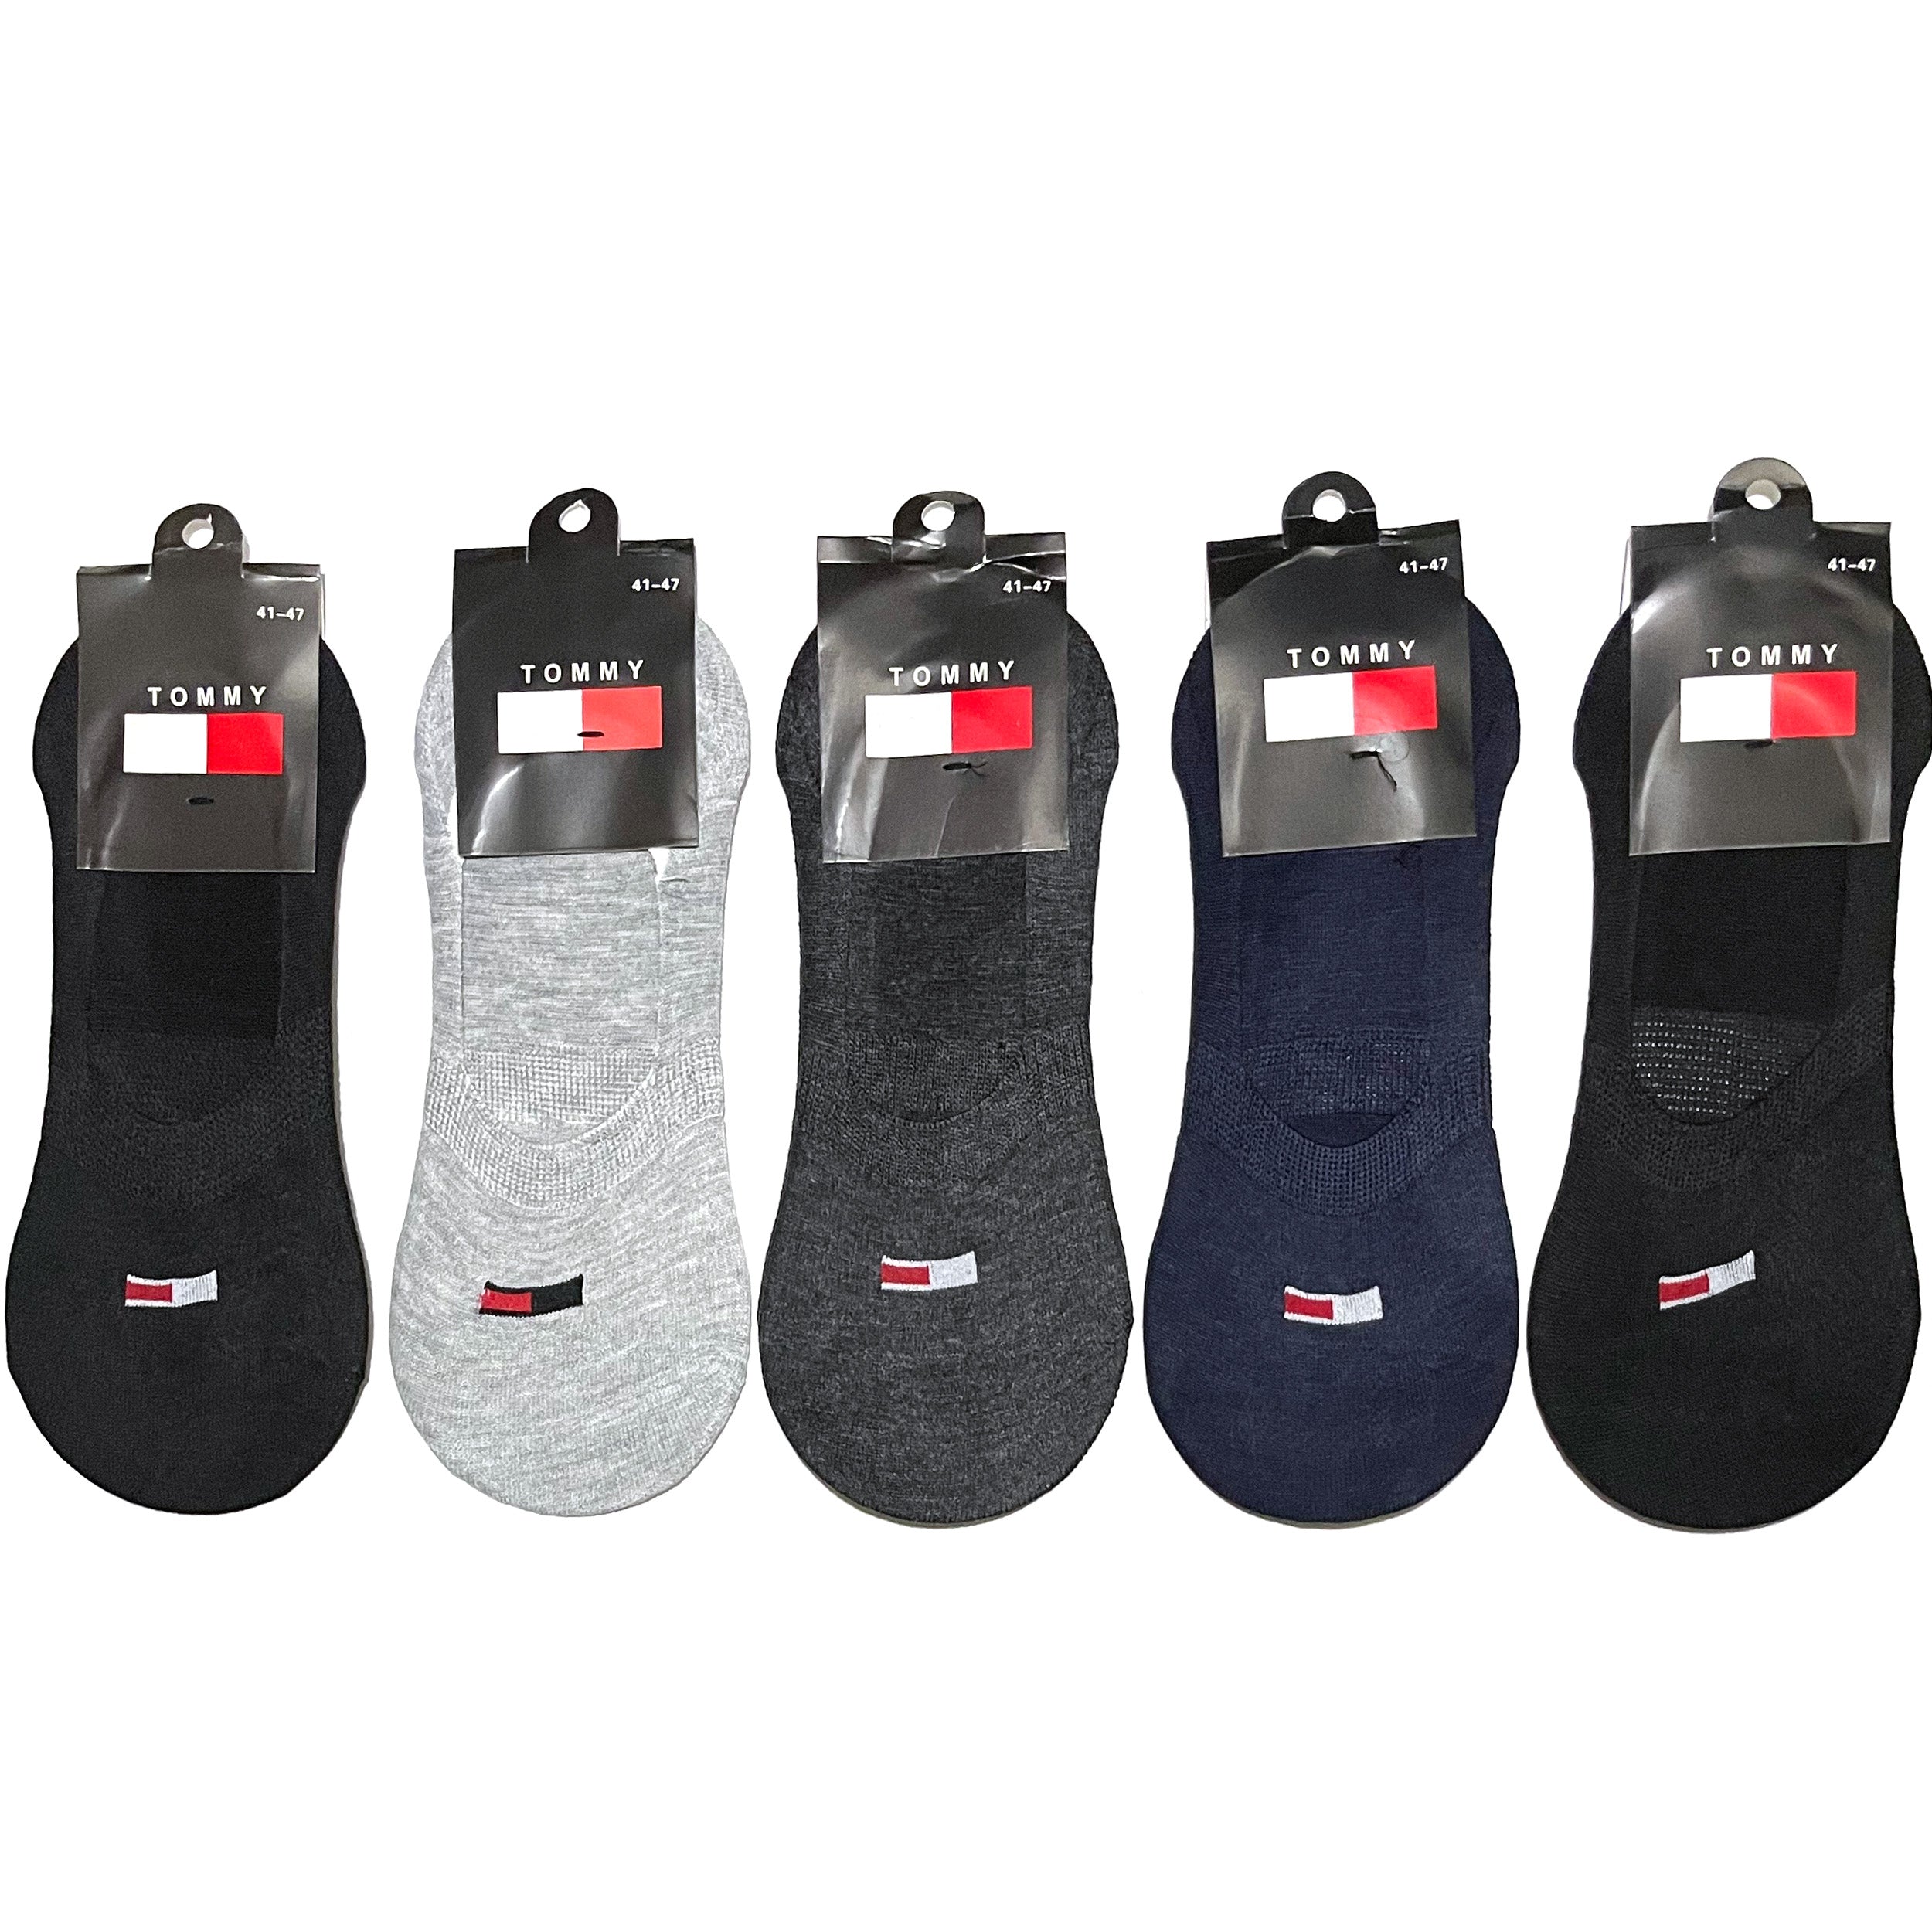 Tommy Hilfiger No Show Socks Pack Of 5 Pairs